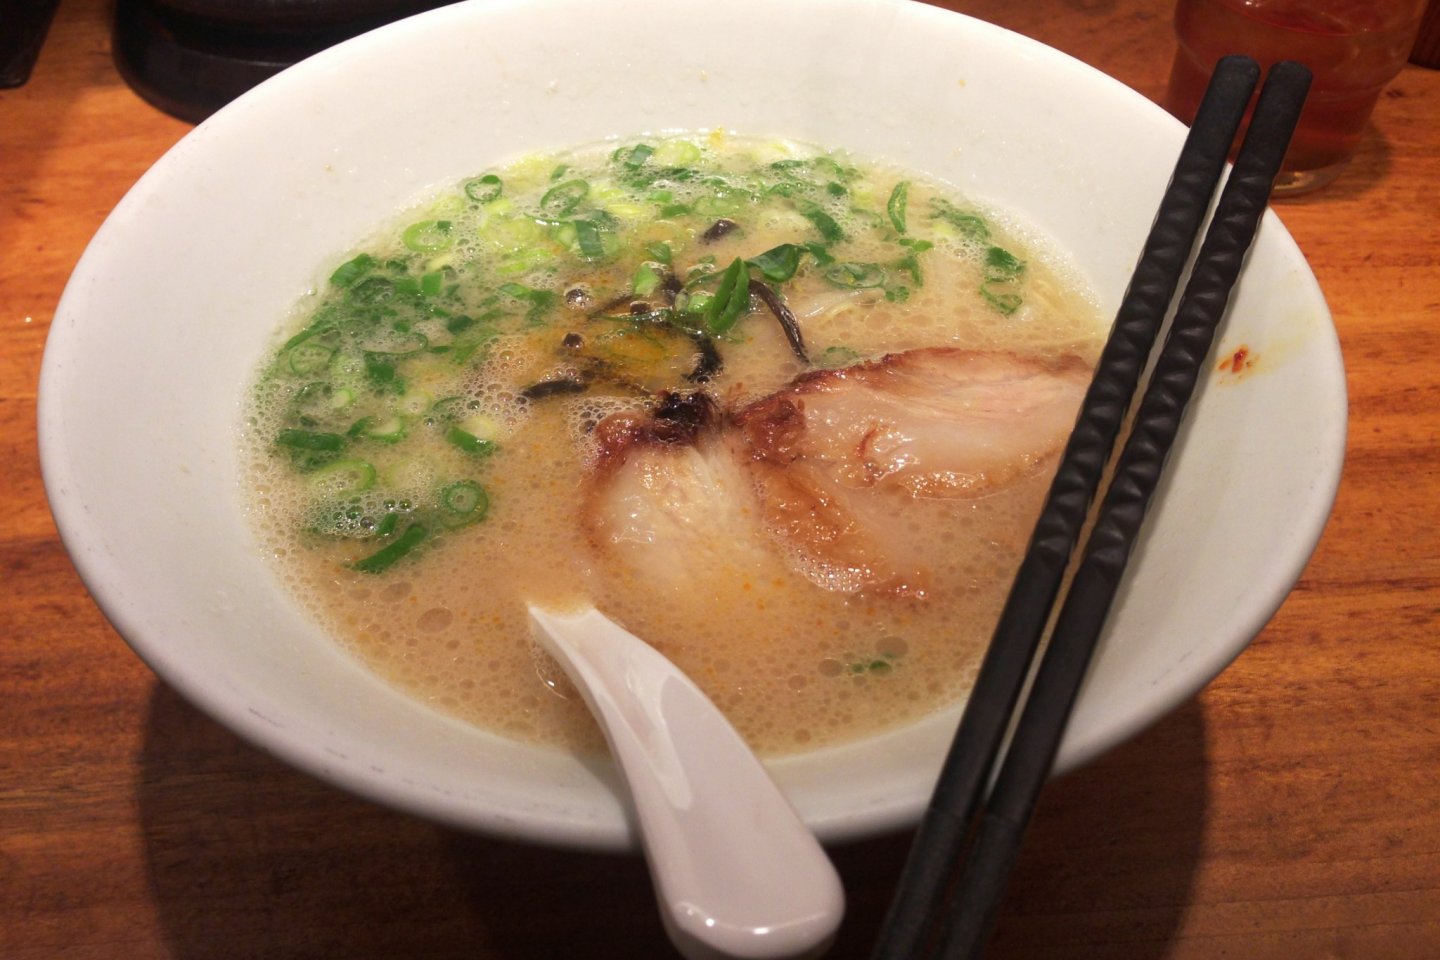 The Shiromaru motoaji is a good introduction if you are new to ramen. This original pork recipe is the basis of  a classic hakata type ramen, and if you forget its name, they have menus in English, Japanese and Chinese.